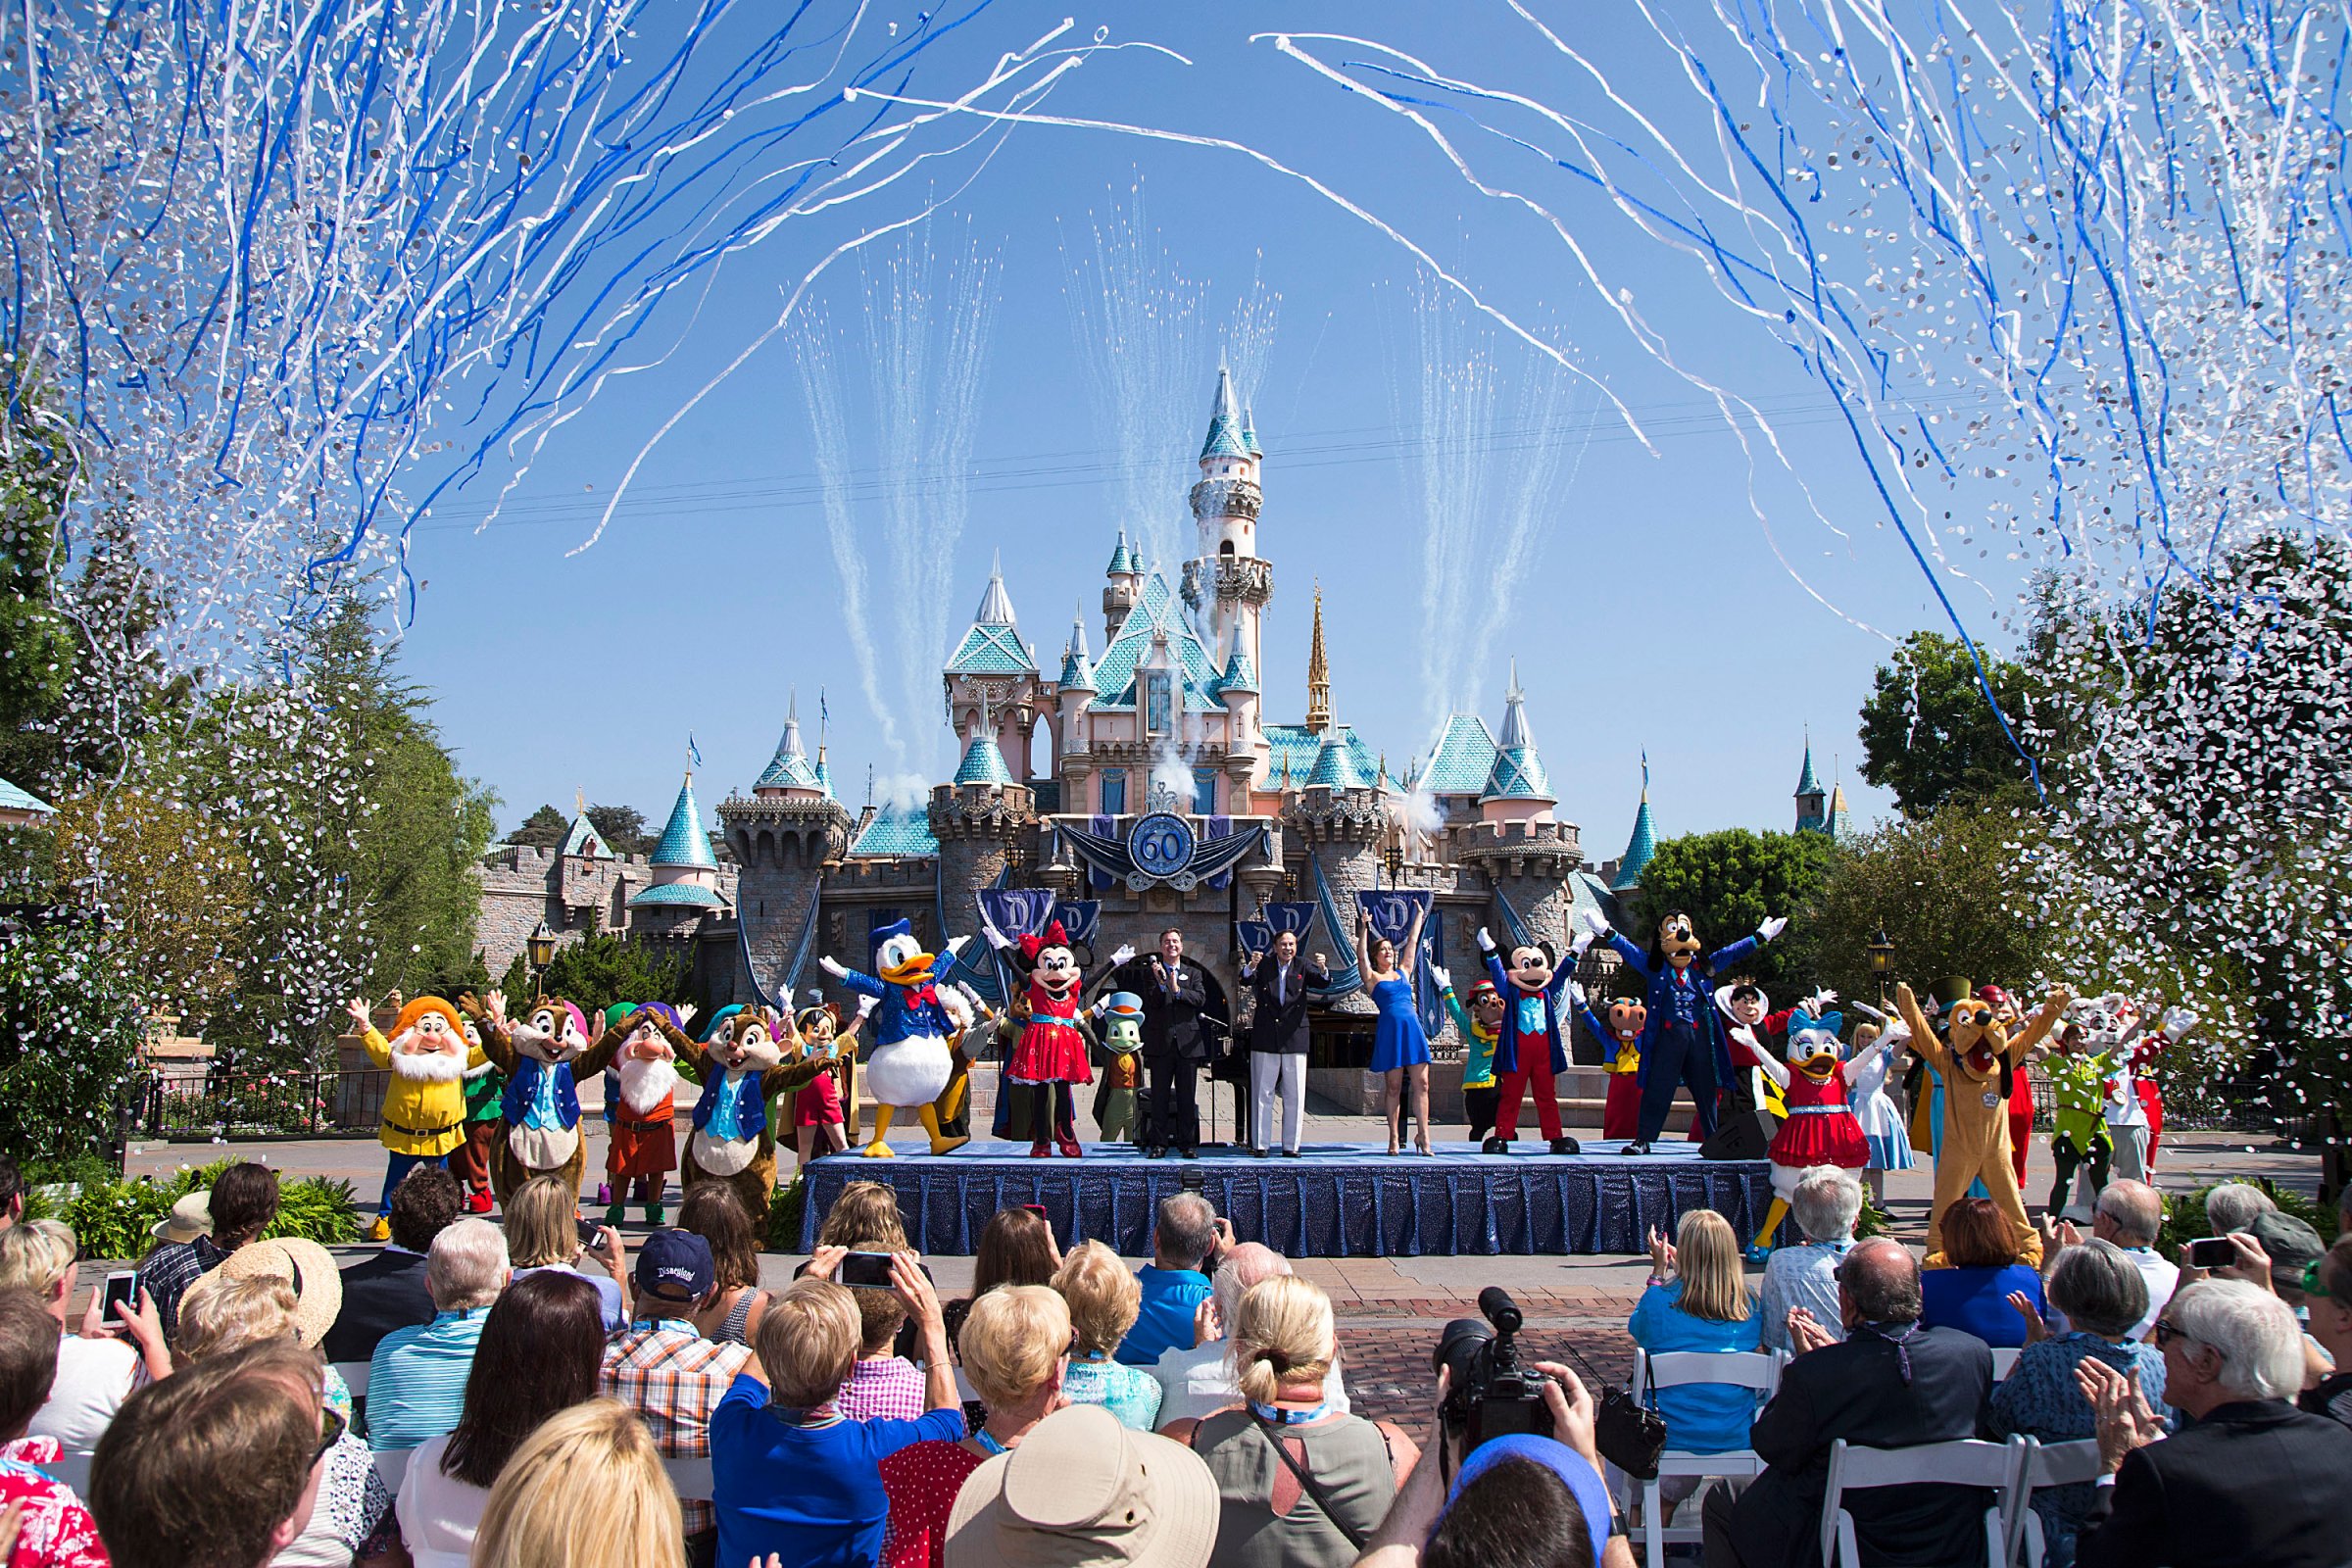 (July 17, 2015) Ð Mickey Mouse and his friends celebrate the 60th anniversary of Disneyland park during a ceremony at Sleeping Beauty Castle featuring Academy Award-winning composer, Richard Sherman and Broadway actress and singer Ashley Brown, in Anaheim, Calif. on Friday, July 17. Celebrating six decades of magic, the Disneyland Resort Diamond Celebration features three new nighttime spectaculars that immerse guests in the worlds of Disney stories like never before with "Paint the Night," the first all-LED parade at the resort; "Disneyland Forever," a reinvention of classic fireworks that adds projections to pyrotechnics to transform the park experience; and a moving new version of "World of Color" that celebrates Walt DisneyÕs dream for Disneyland. (Paul Hiffmeyer/Disneyland Resort)